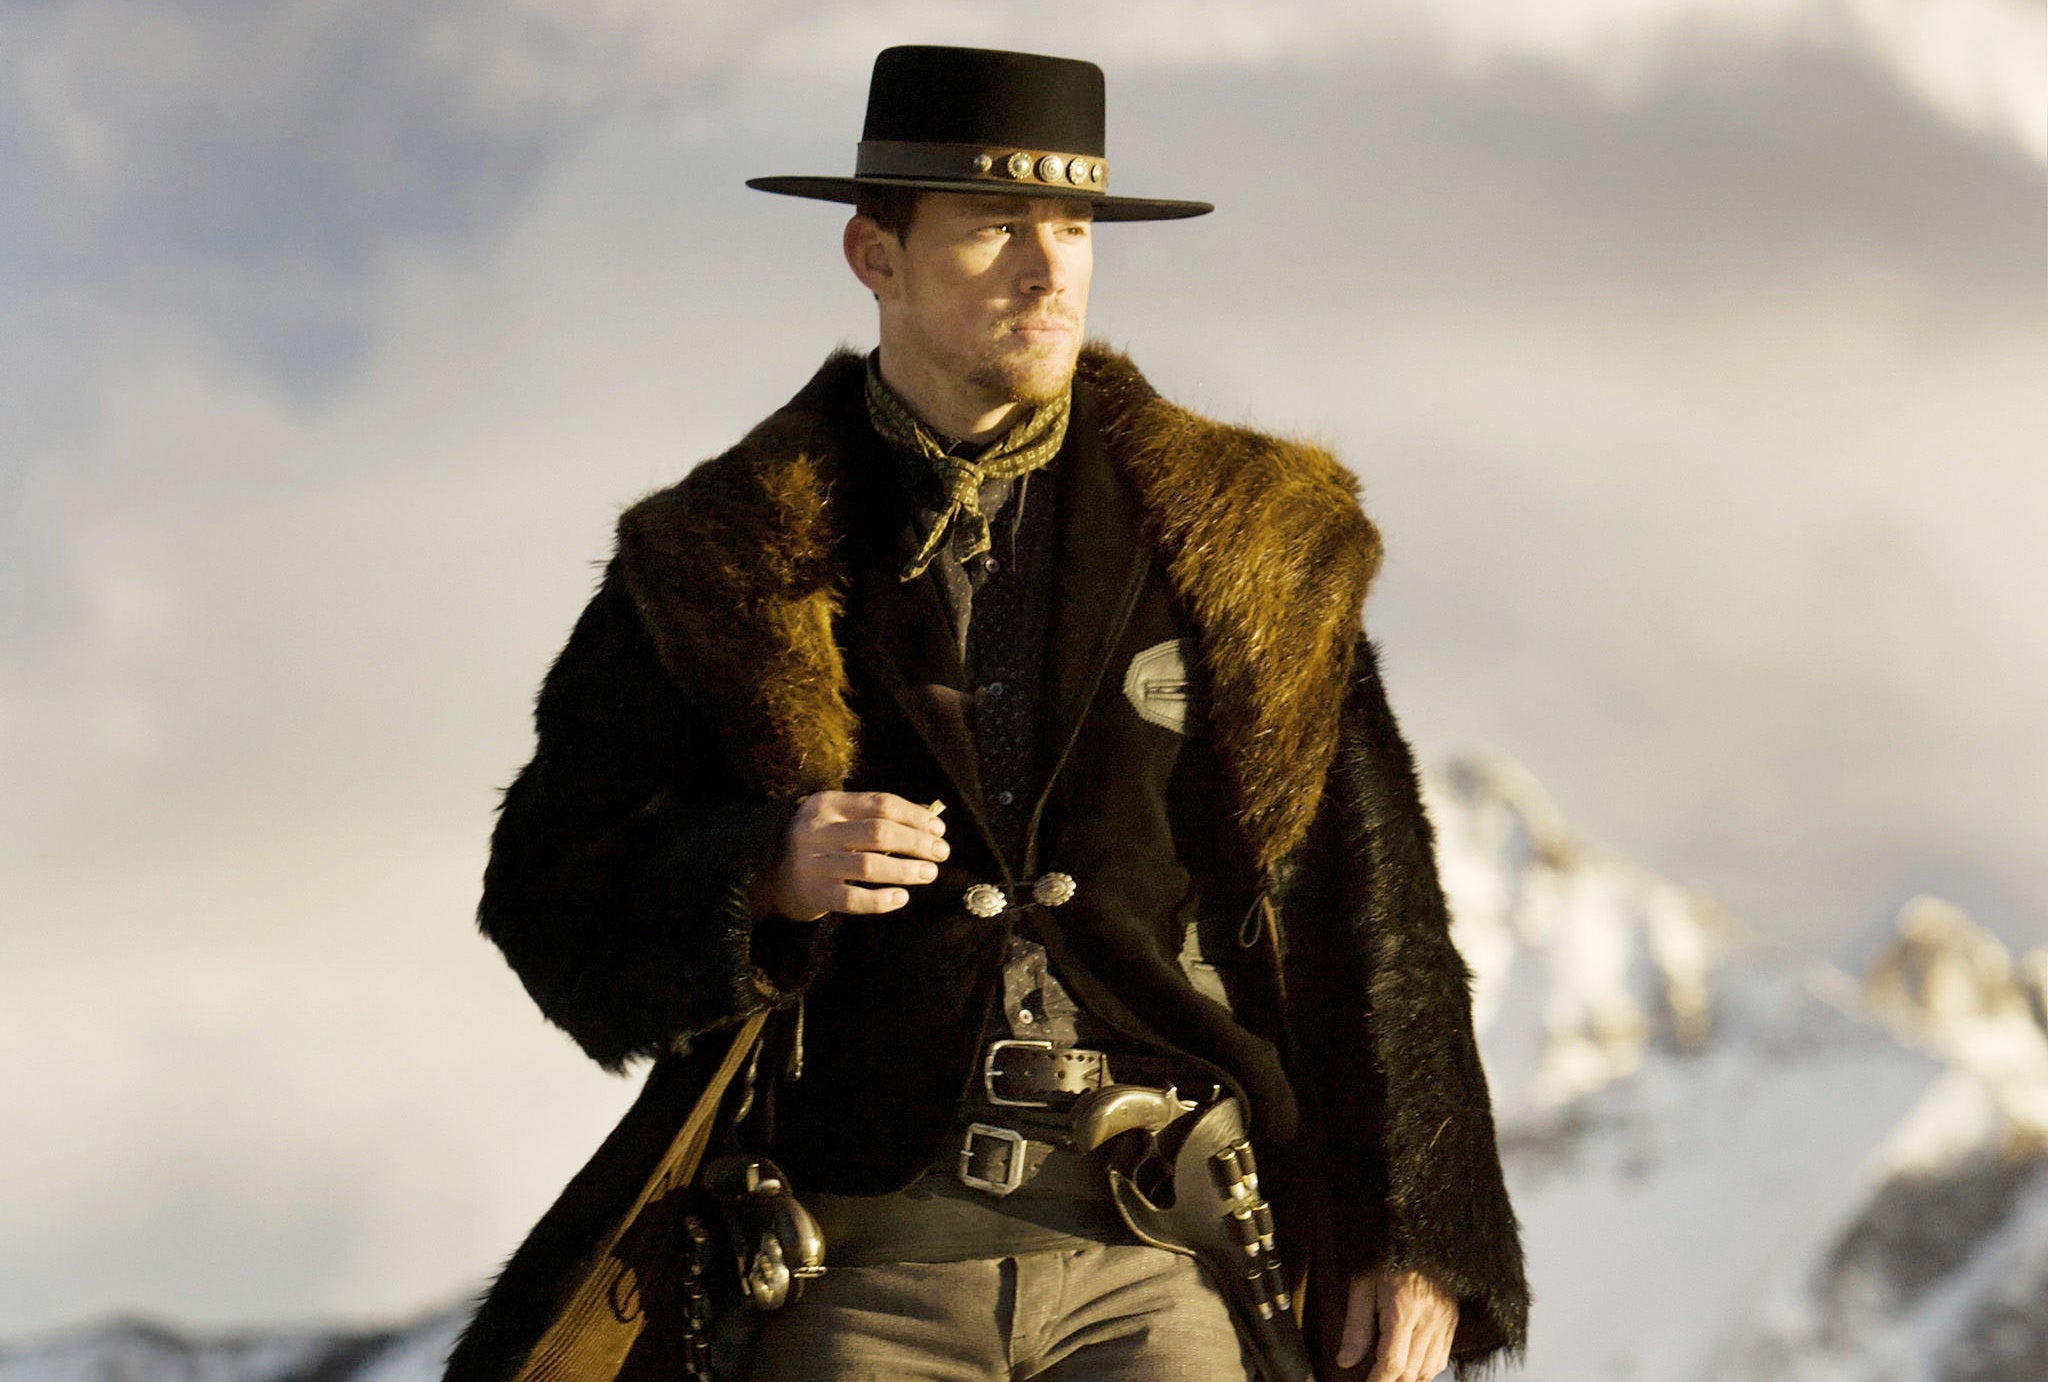 Tatum in front of snowy mountains wearing a fur coat and a wide-brimmed hat